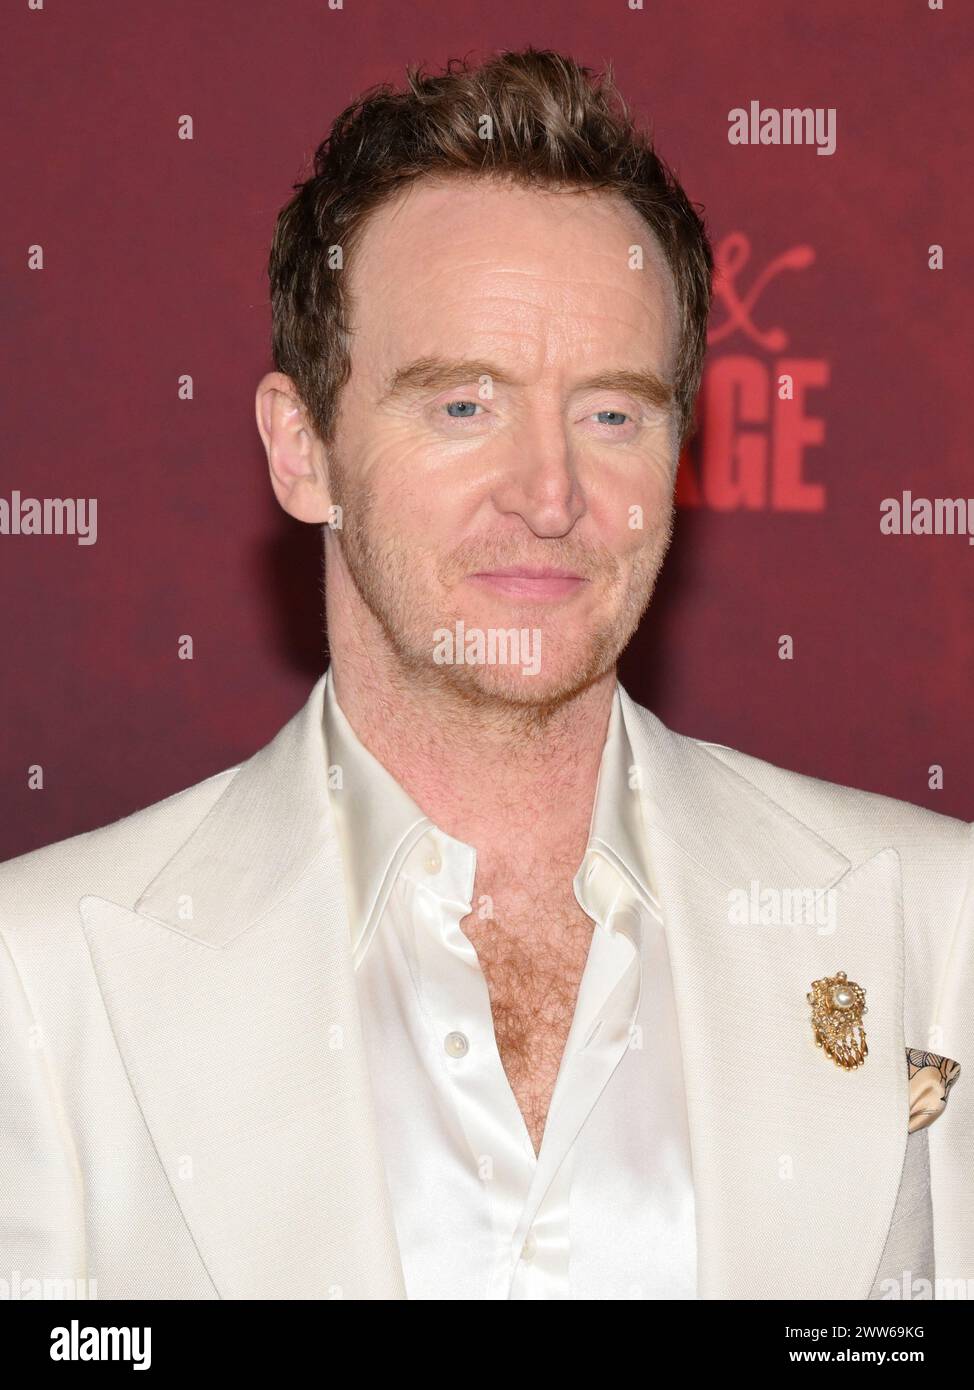 March 21, 2024, Los Angeles, California, U.S.: Tony Curran attends the STARZ's ''Mary & George'' red carpet premiere. (Credit Image: © Billy Bennight/ZUMA Press Wire) EDITORIAL USAGE ONLY! Not for Commercial USAGE! Stock Photo